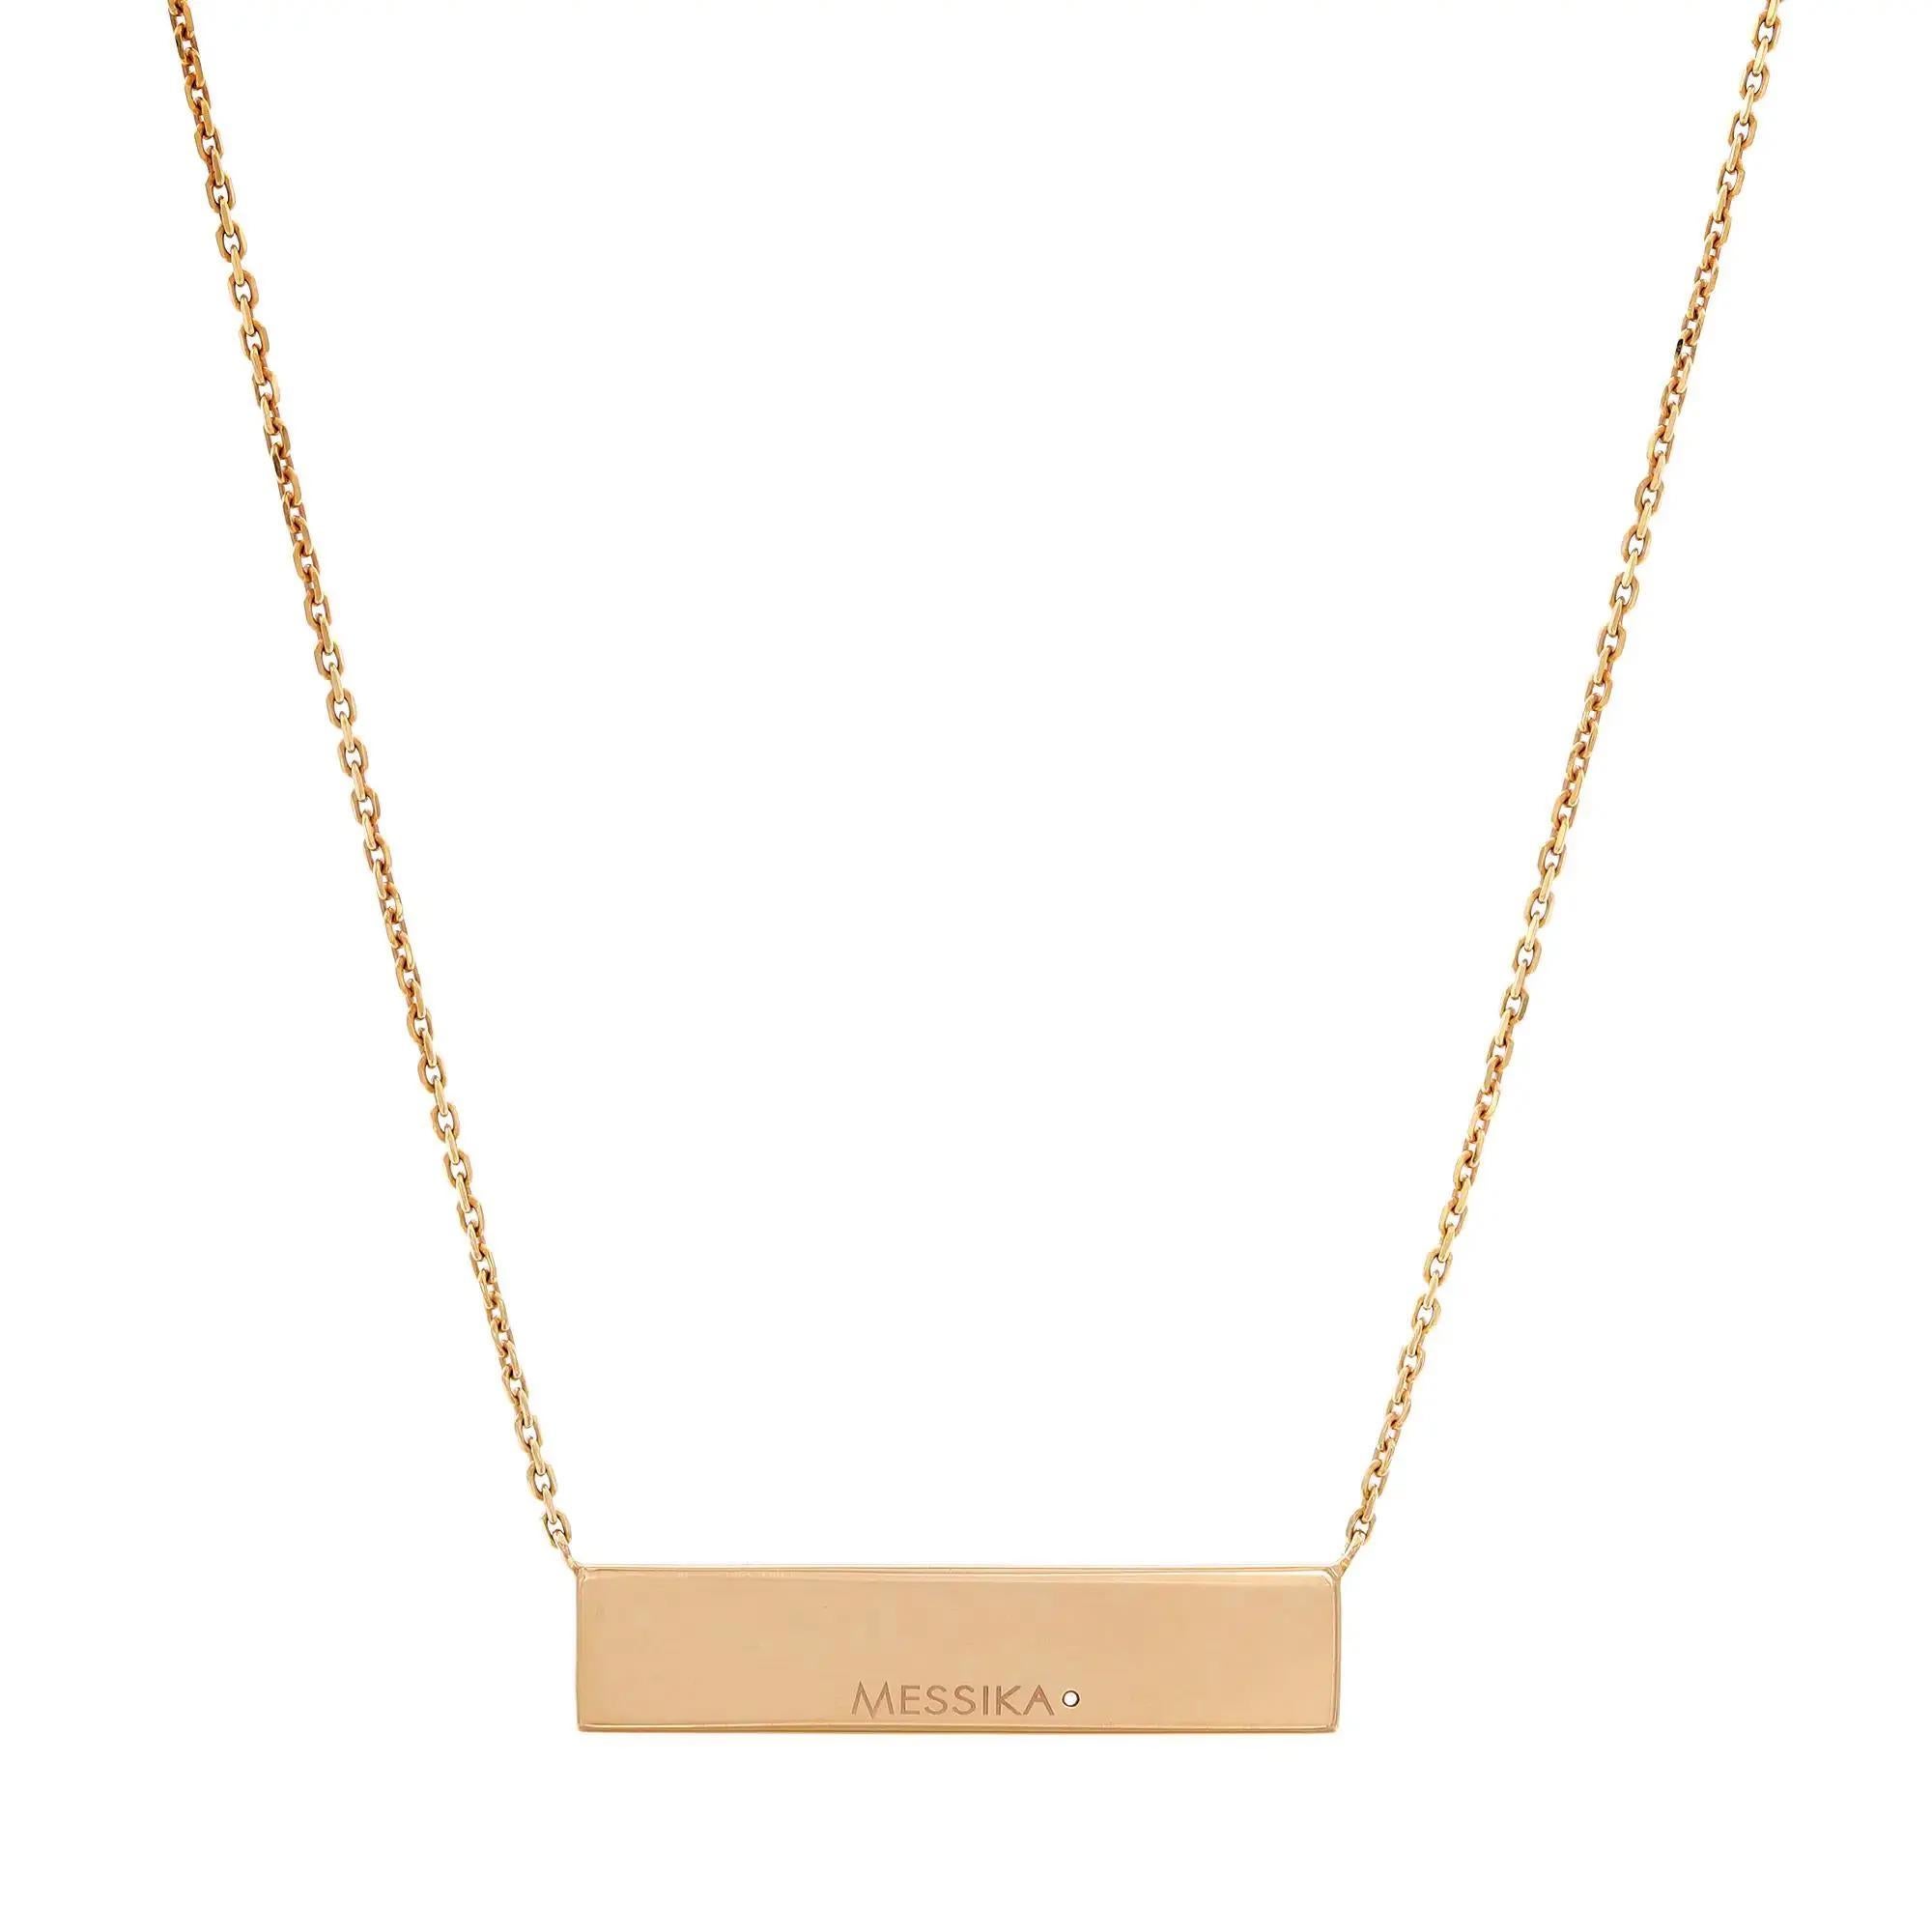 Elegant and alluring, this Messika Kate diamond horizontal bar chain necklace features a row of pave set round cut shimmering white diamonds weighing 0.36 carat. Diamond quality: G color and VS clarity. Crafted in fine 18K rose gold. The necklace is